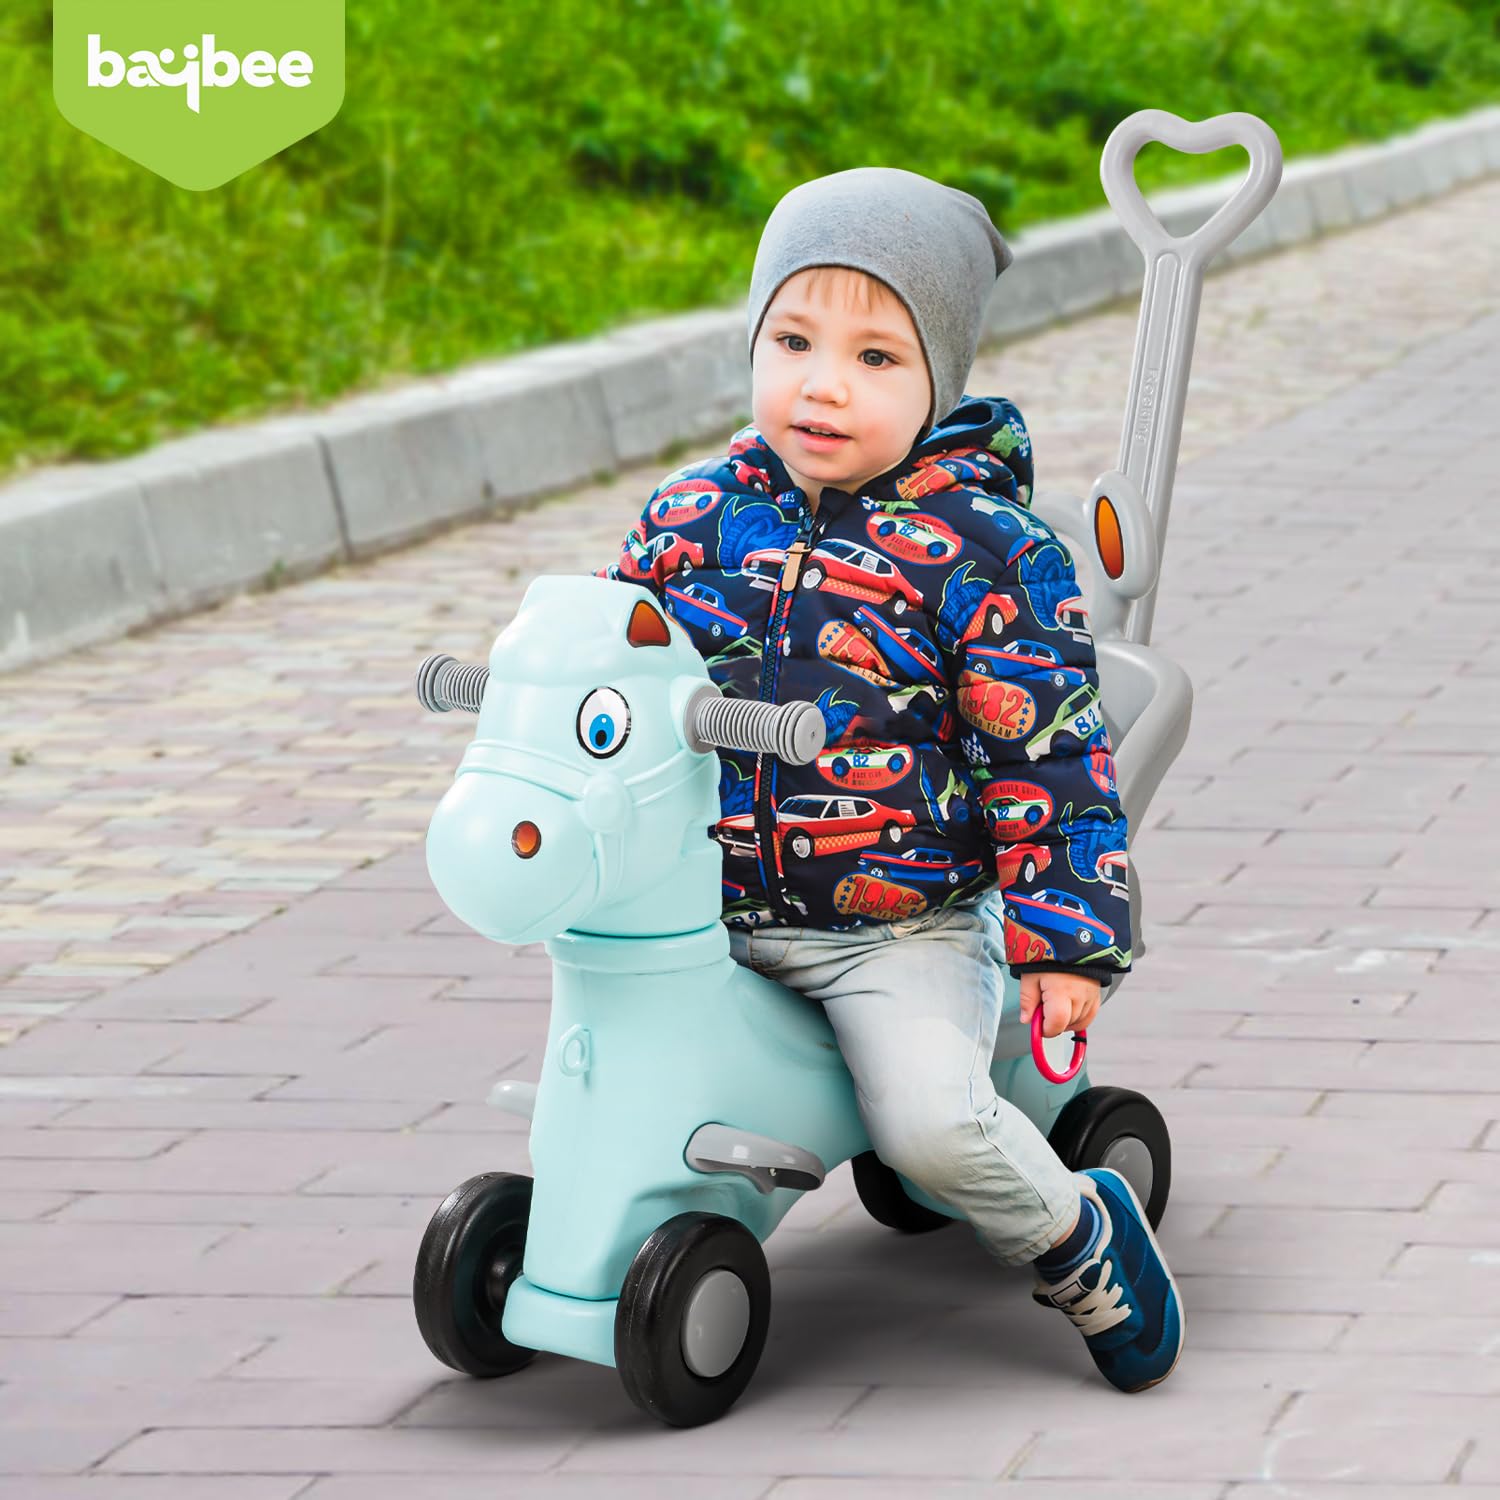 Baybee 3 in 1 Baby Horse Rider Kids Ride On Car for Kids, Push Ride on Toy with Rocker, Push Handle, Rotating Head & Safety Belt | Baby Car Rocking Horse | Kids Car for Toddlers 1 to 3 Year Boy Girl